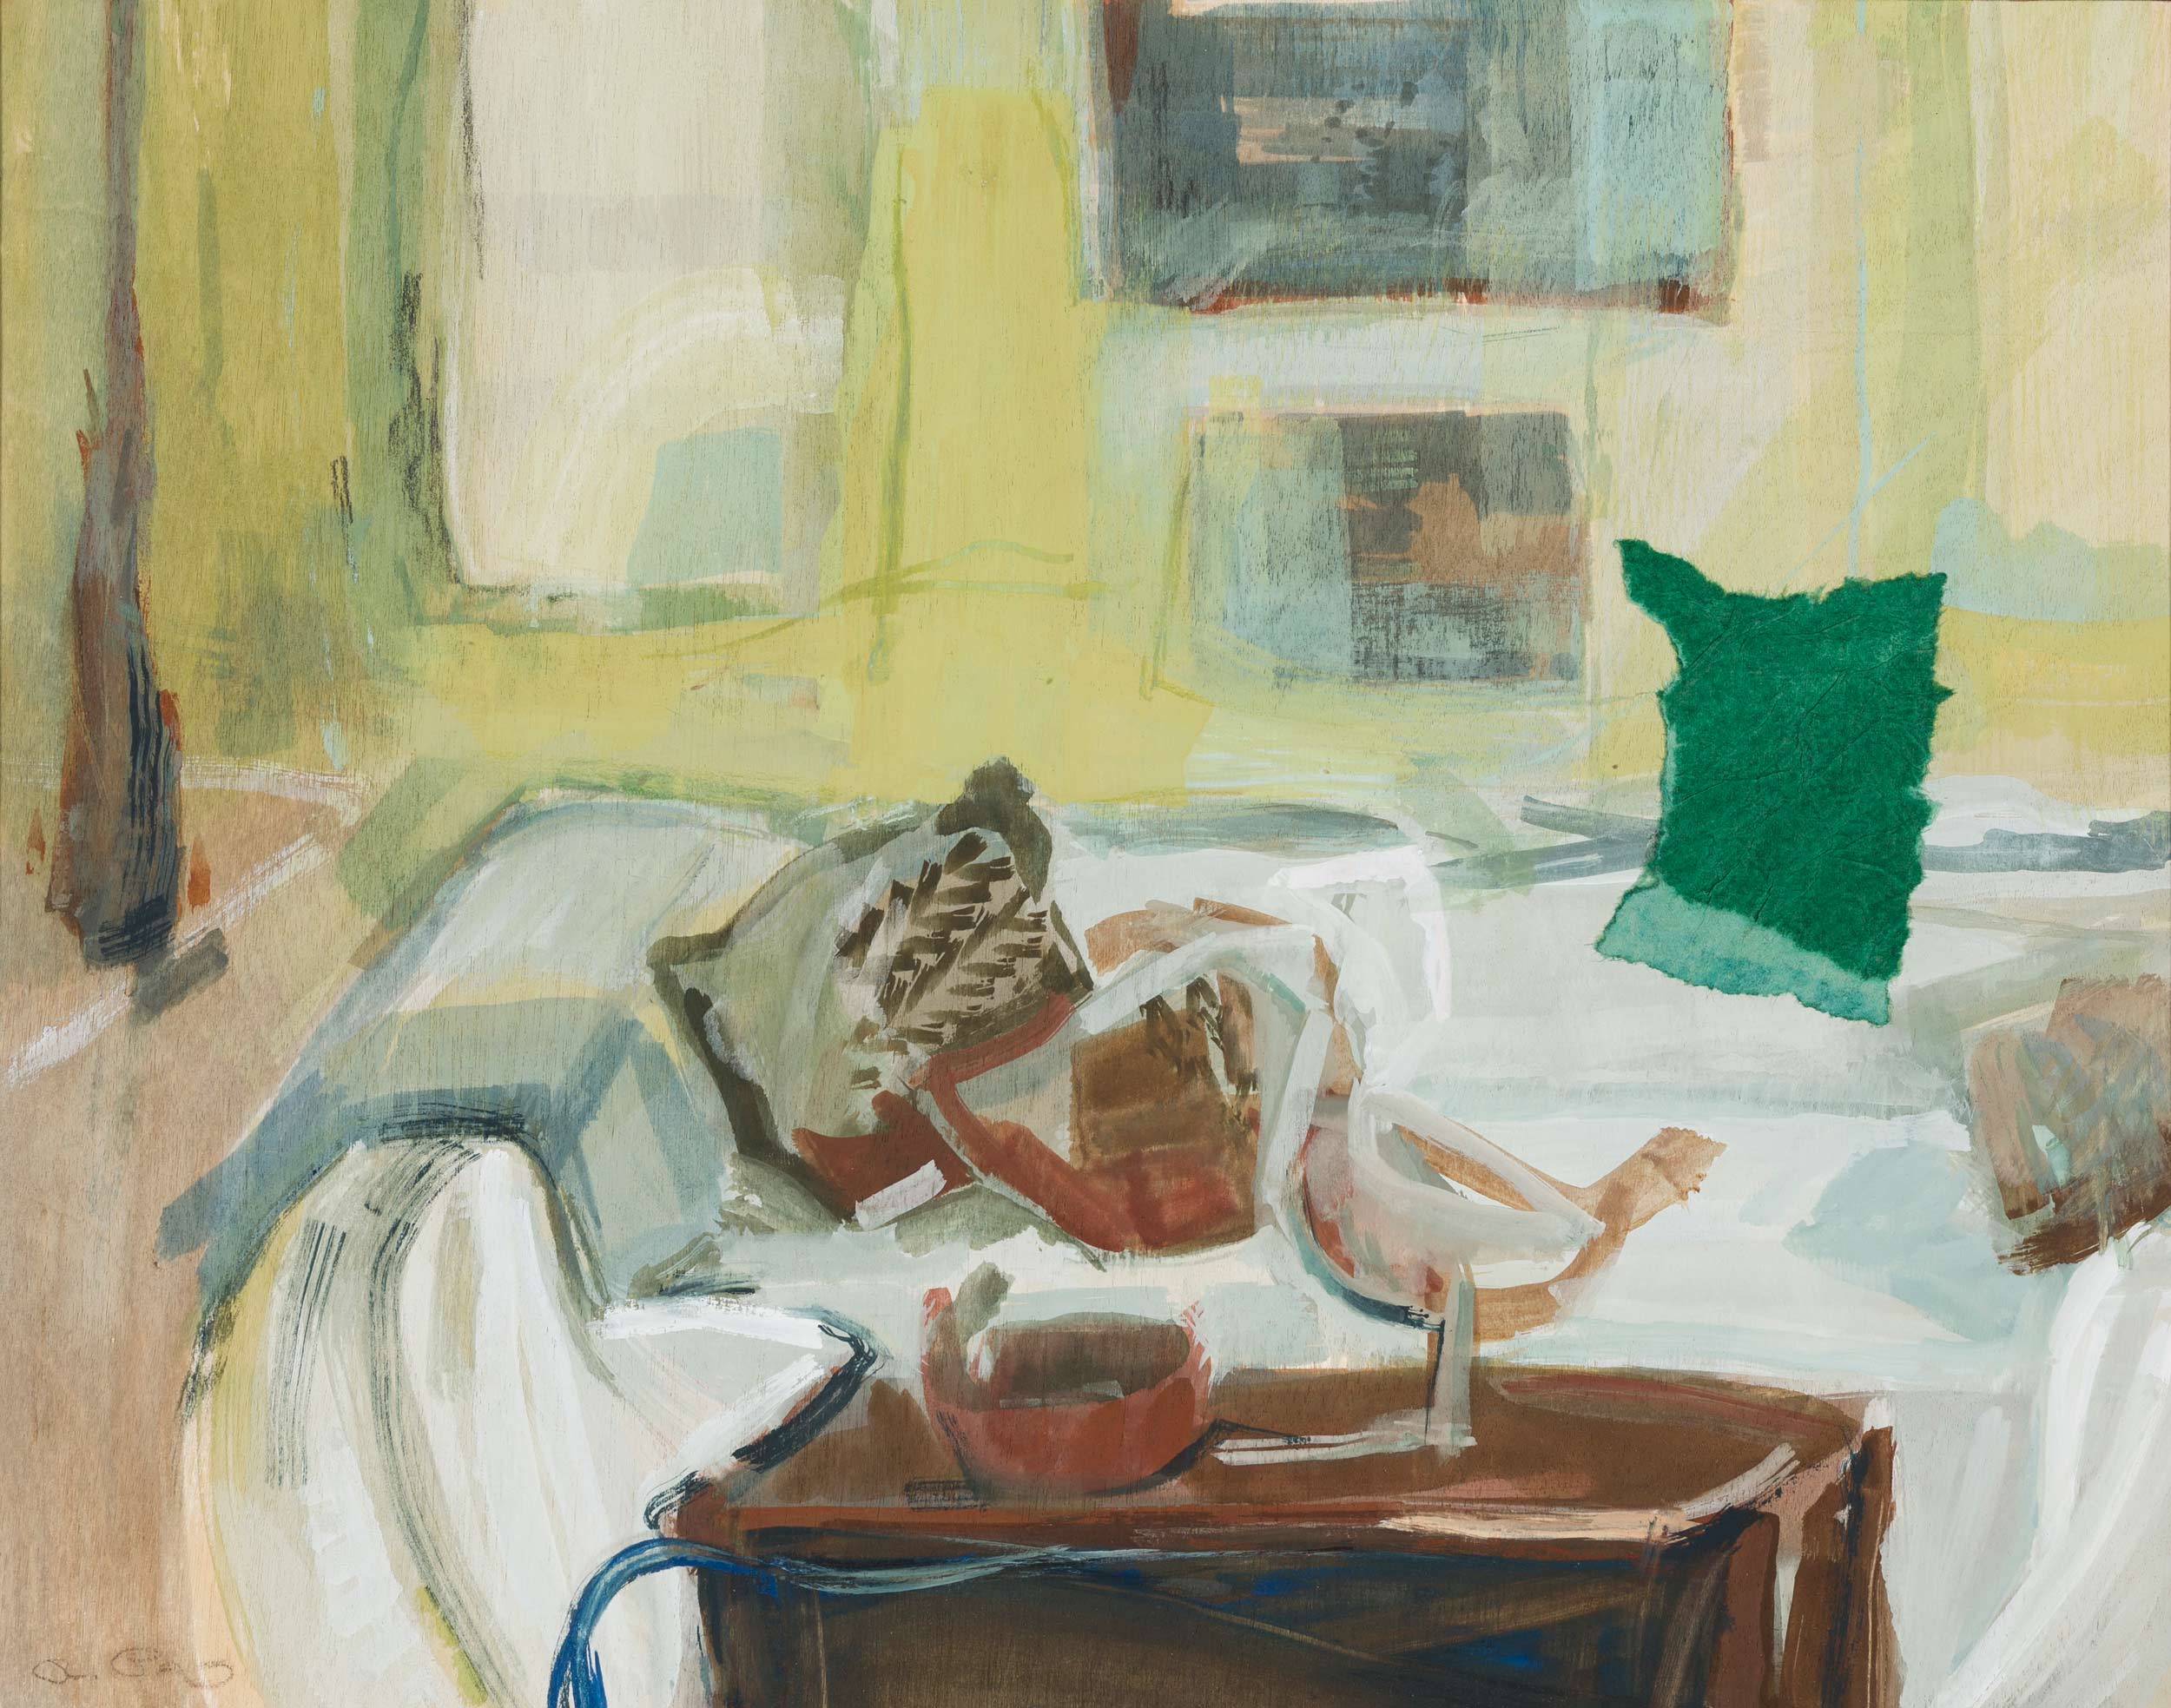   Room with a Bird   Gouache on board 28x35cm   Catalogue essay  by Professor Michael Tawa 